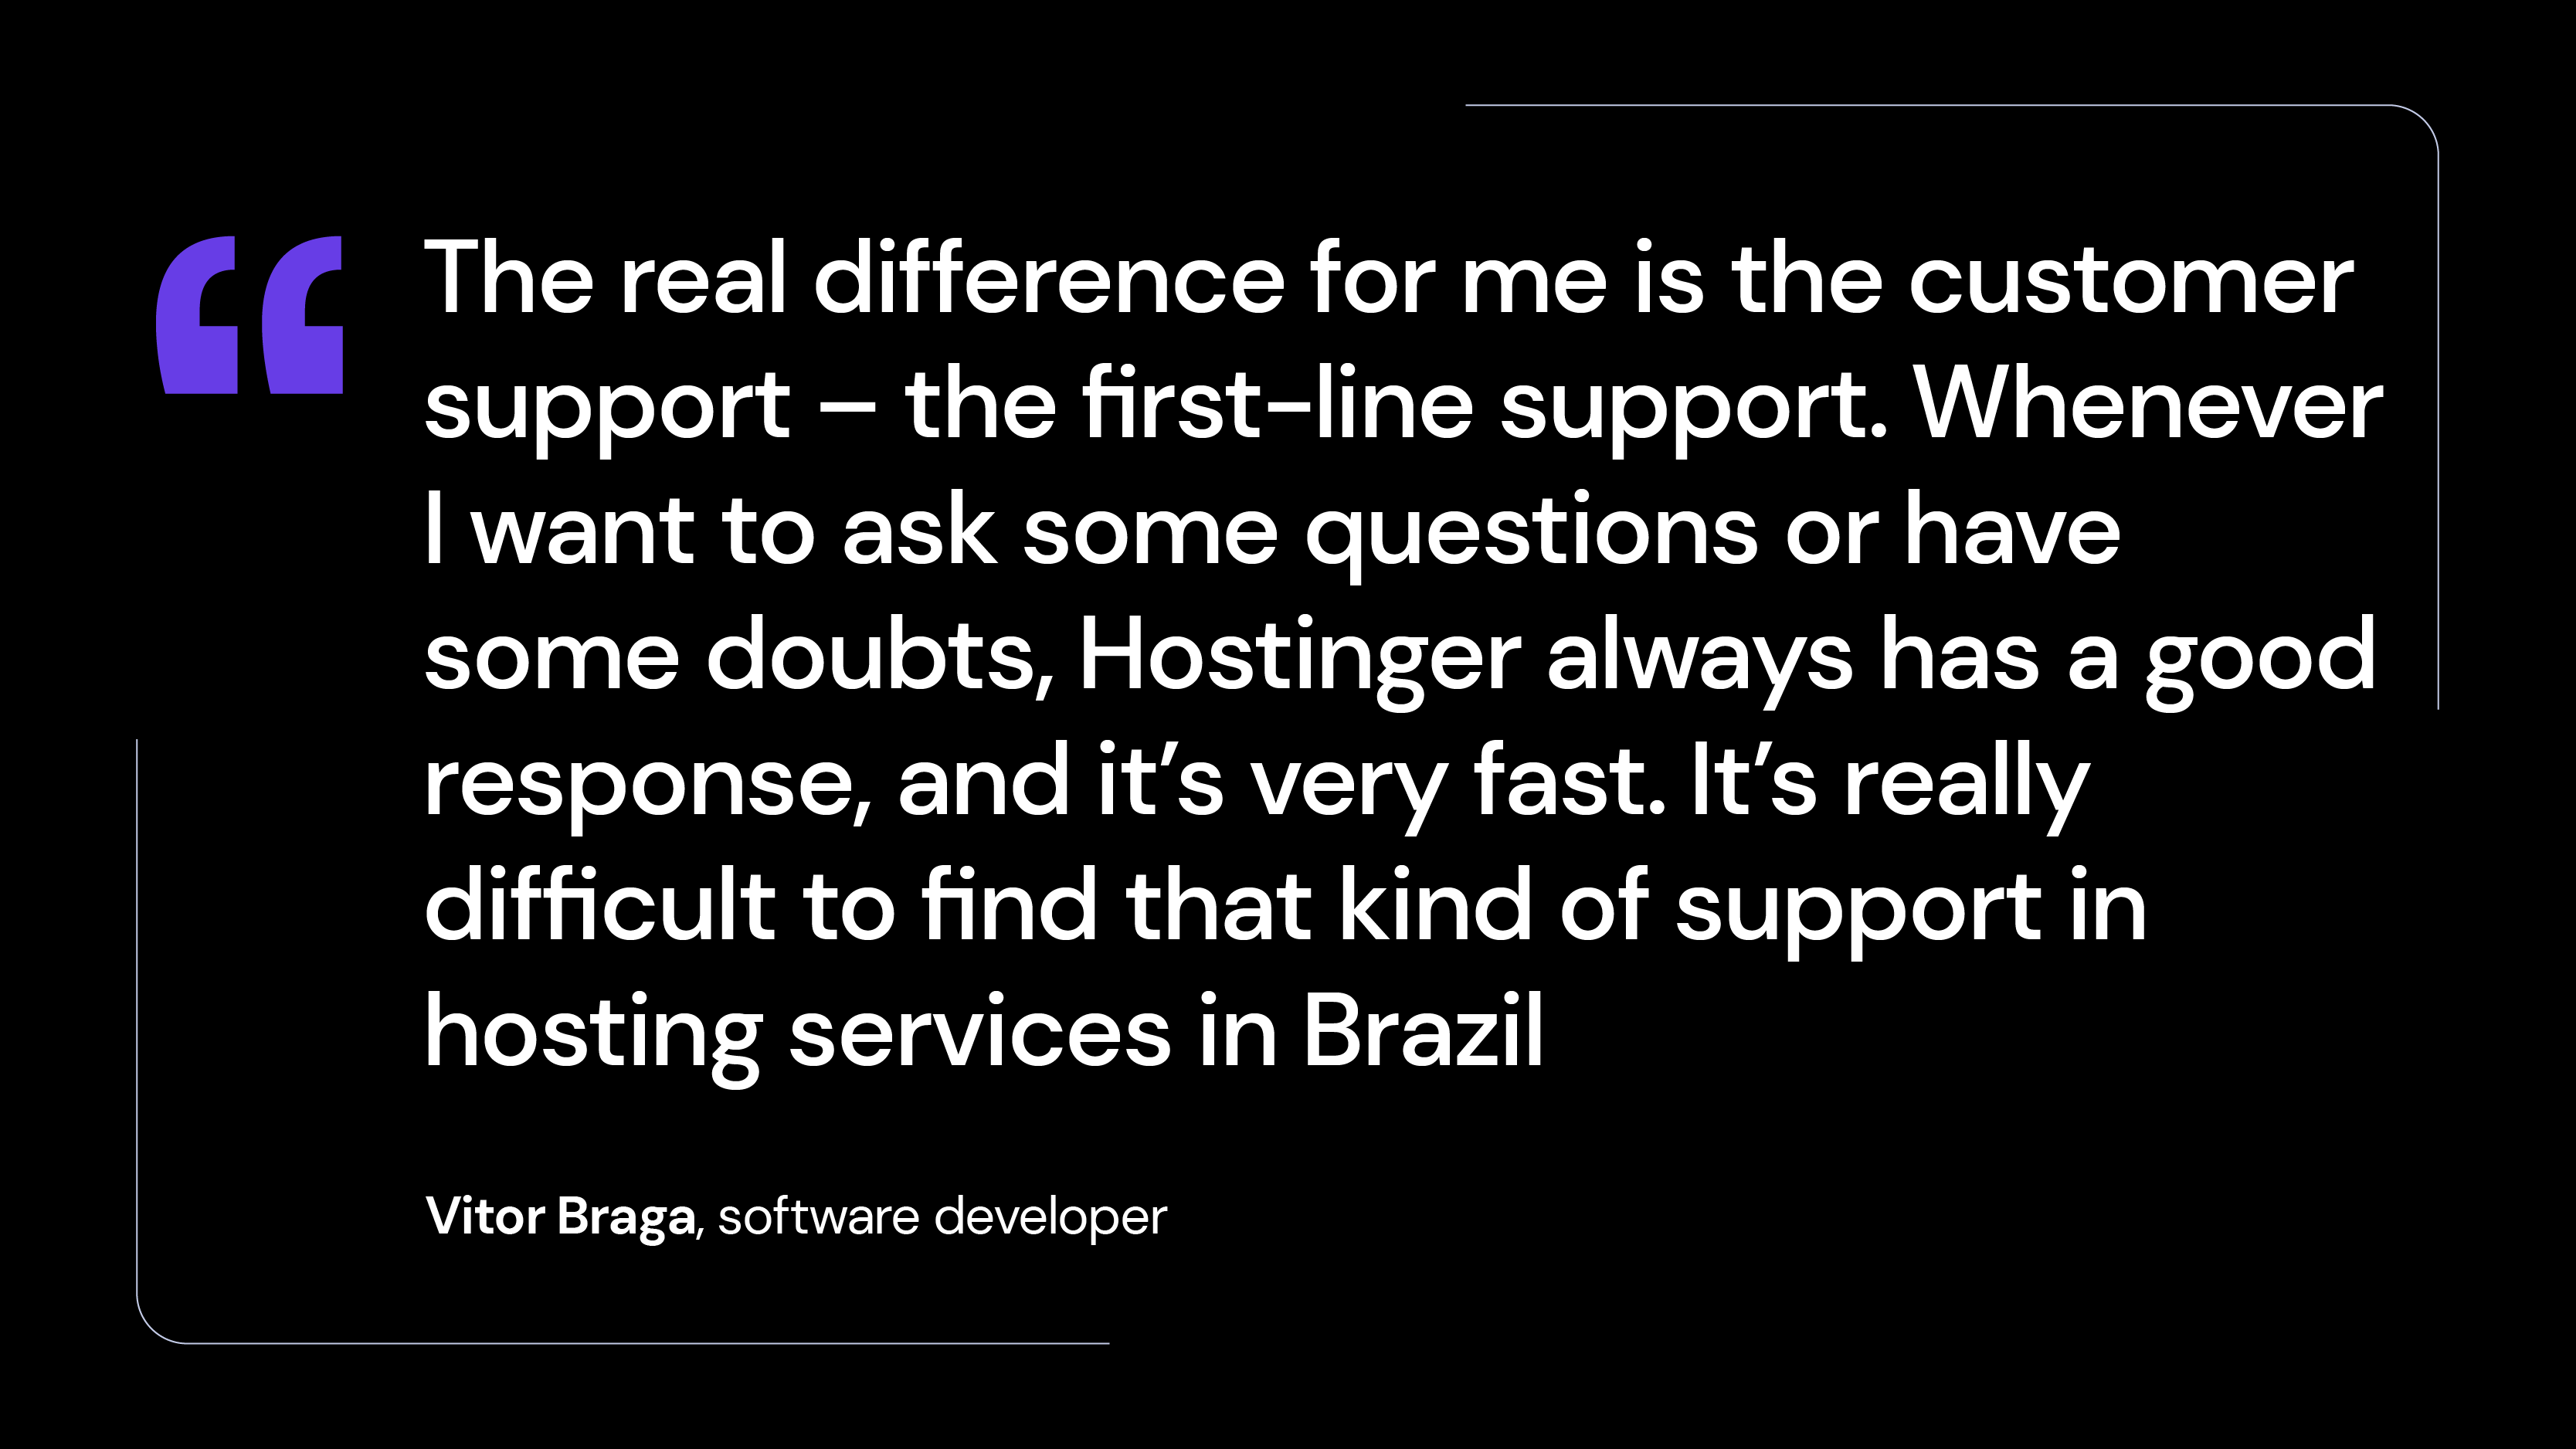 A quote about Vitor Braga's positive experience with Hostinger's customer support